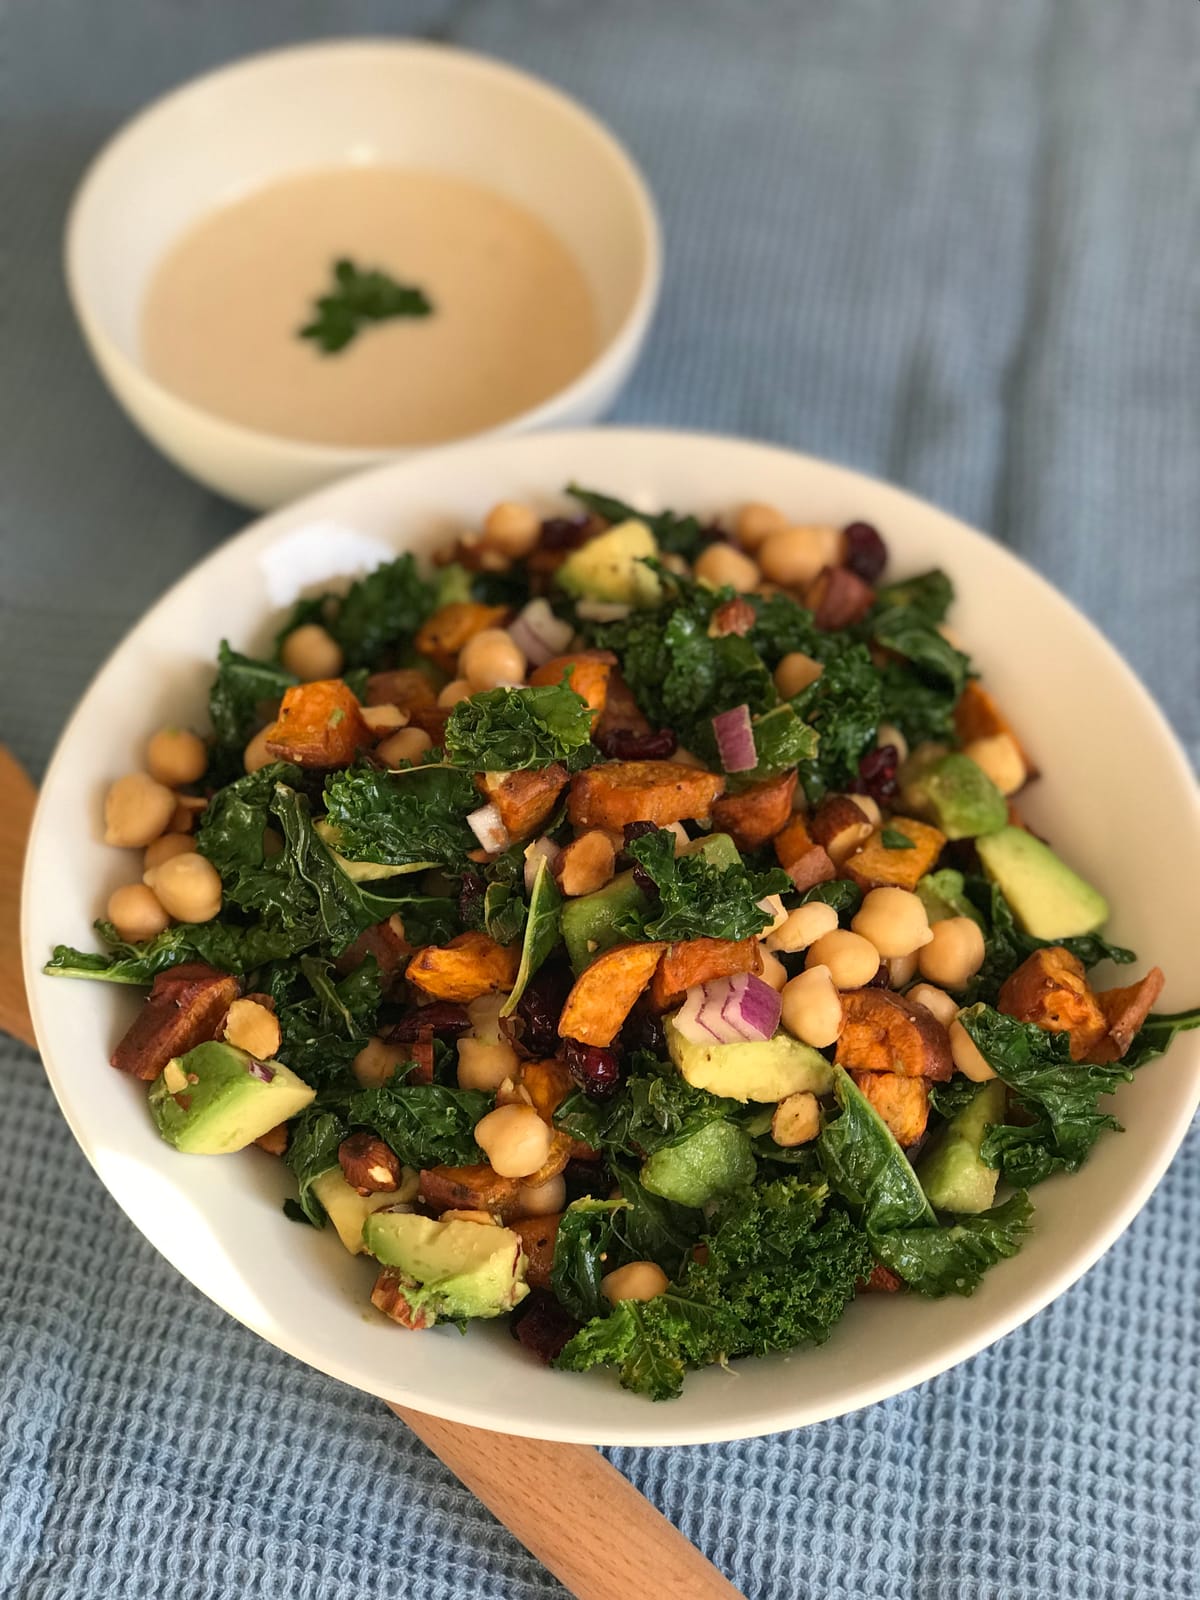 Yummy Sweet Potatoes, Kale and Chickpeas Salad with delicious creamy Tahini Dressing